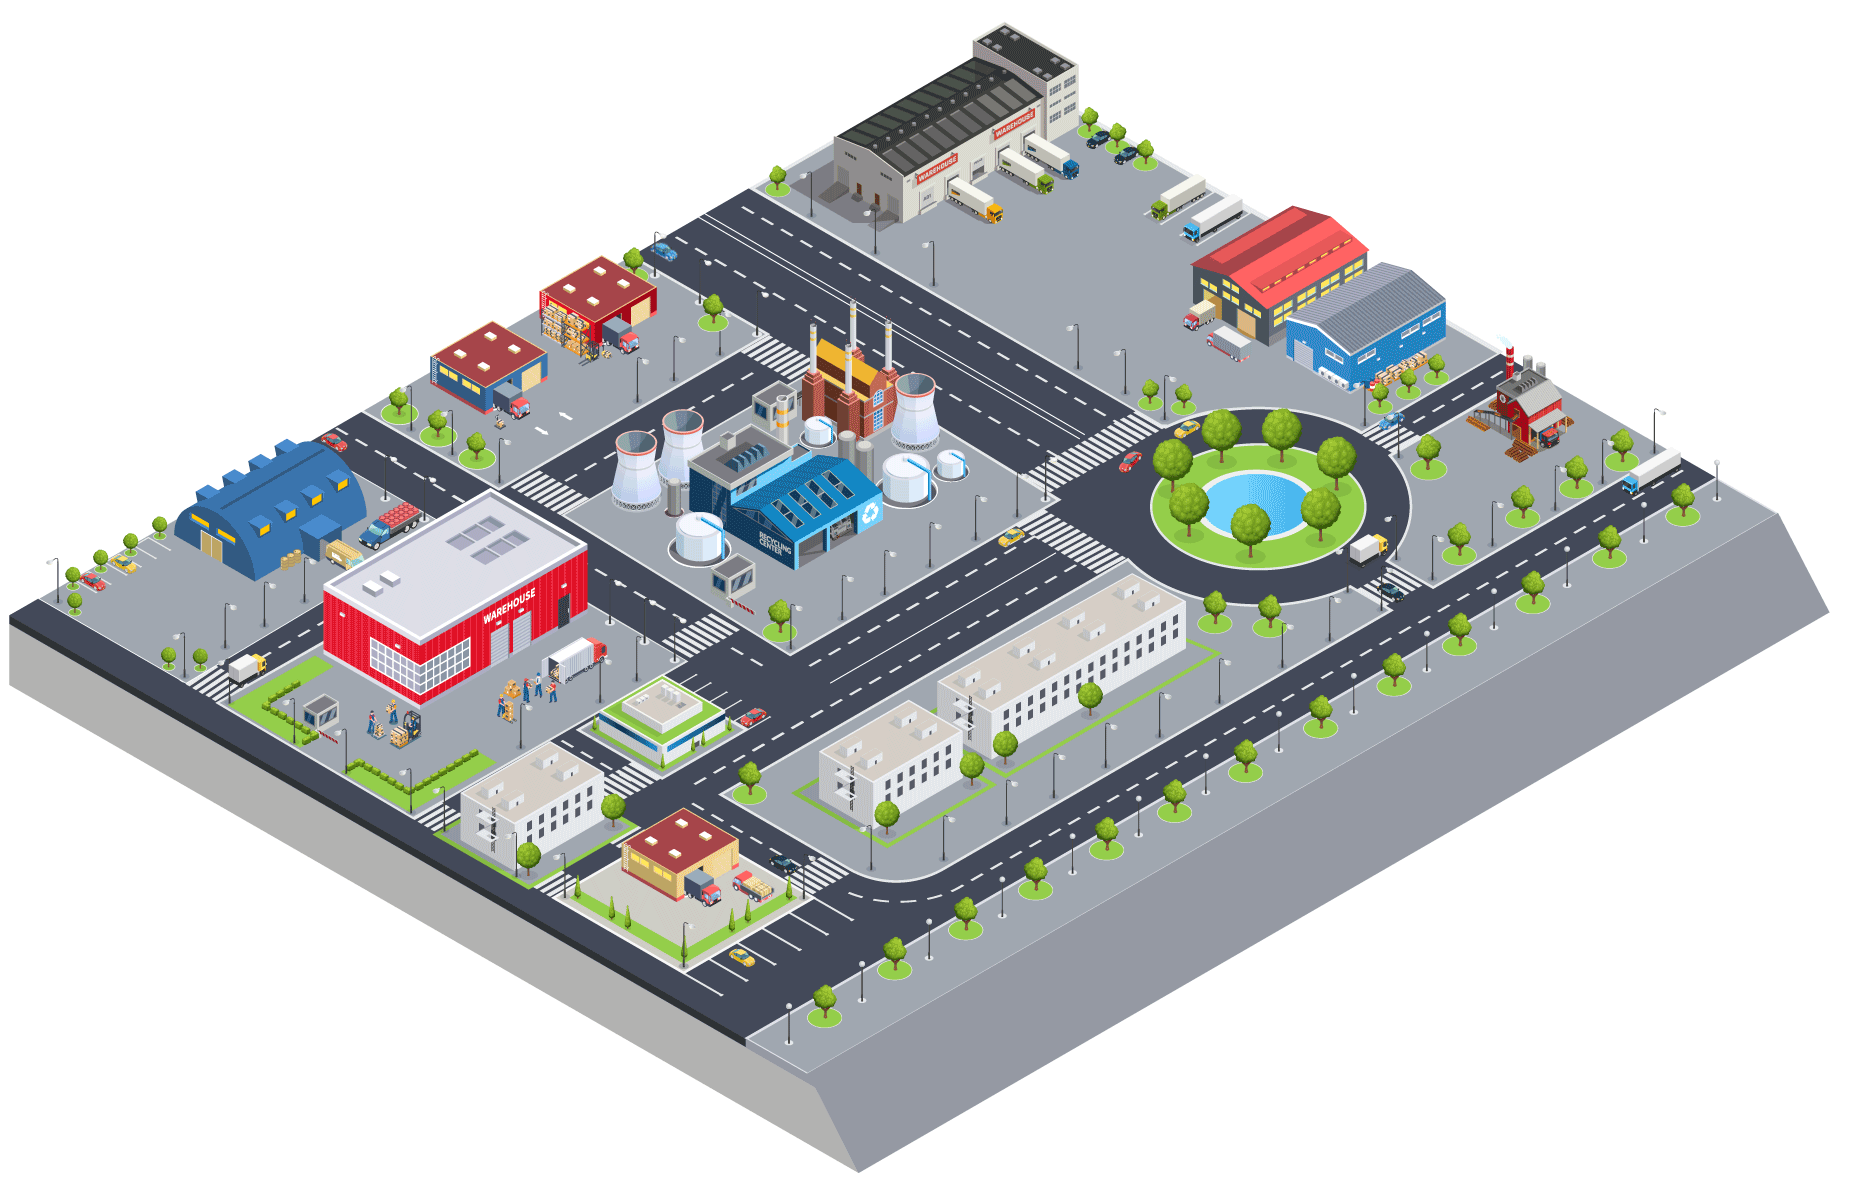 Illustration representing several logistics spaces separated by roads and green spaces, with cars in motion